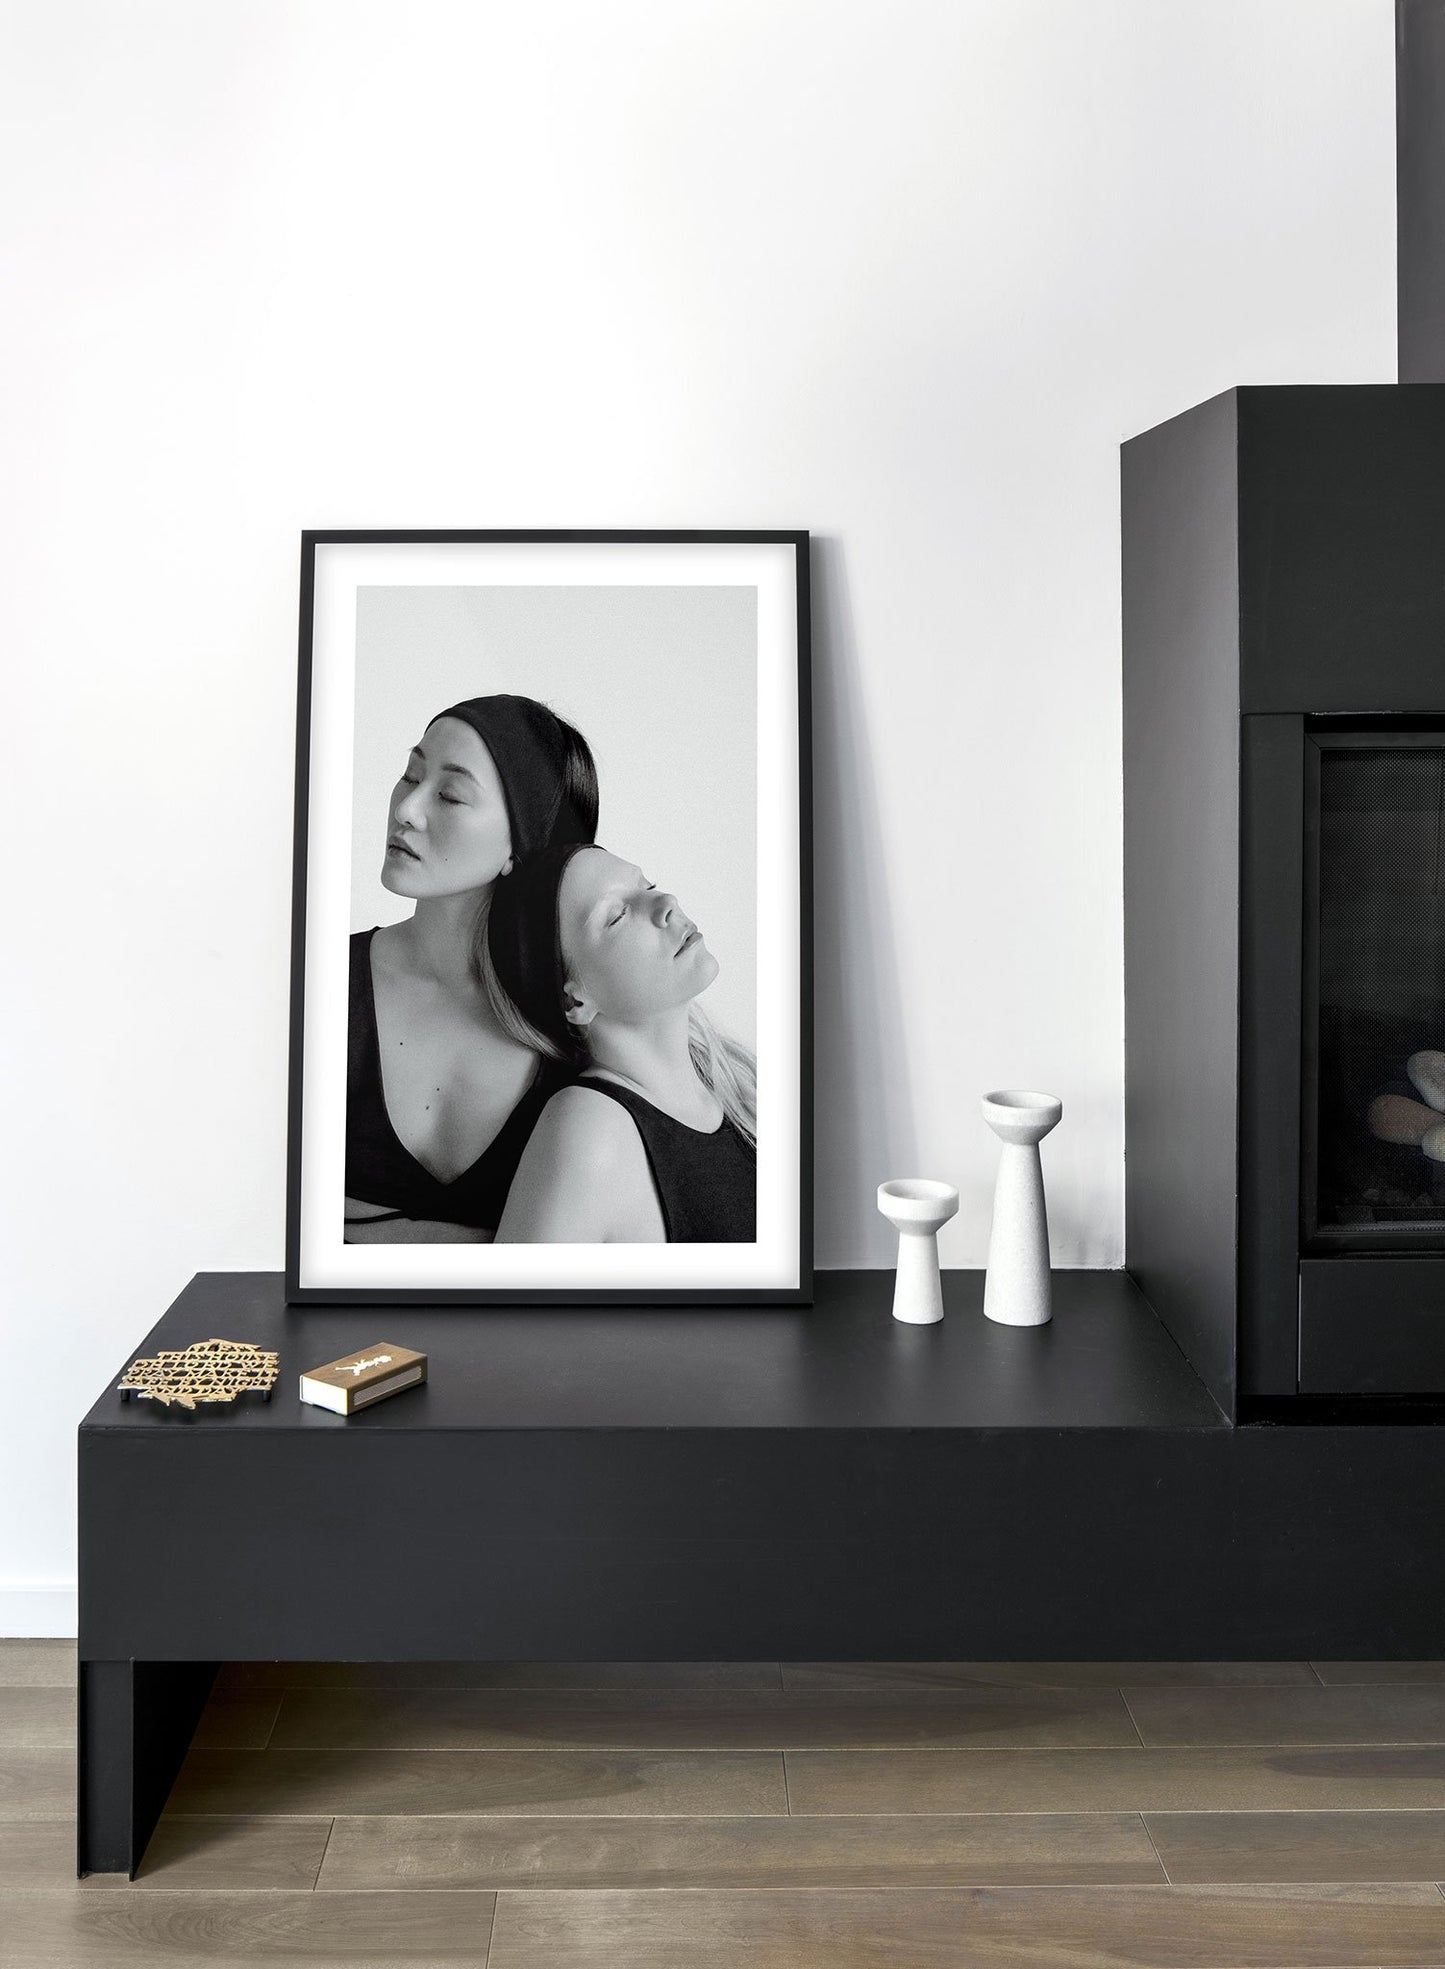 Black and white fashion photography poster by Opposite Wall with woman leaning on each other - Lifestyle - Living Room